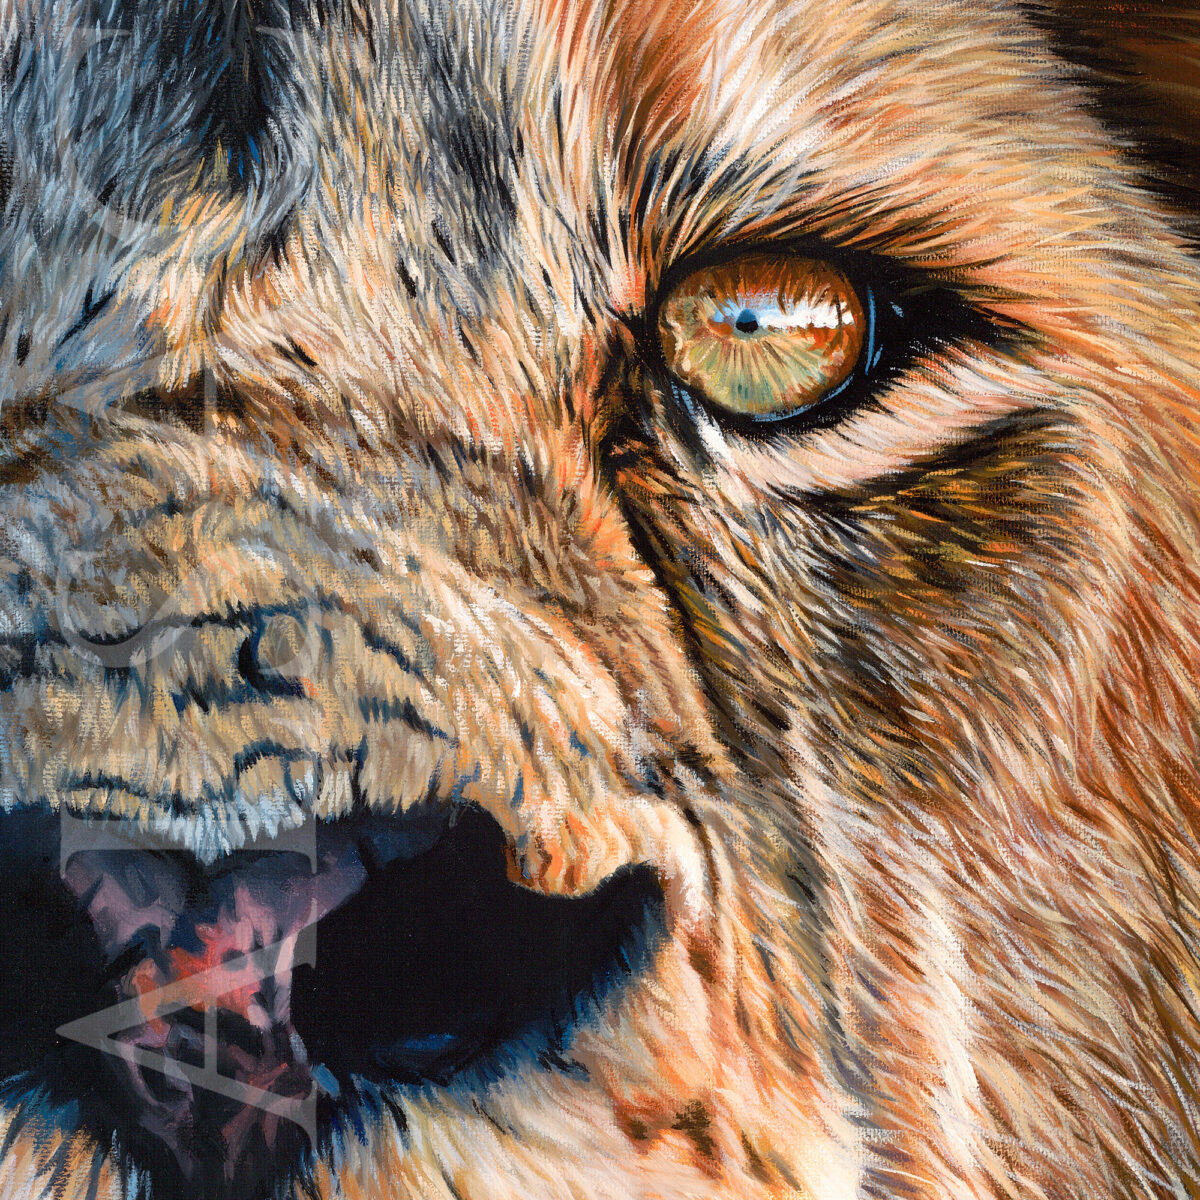 Detail of the painting "maximus": portrait of a magnificent hyper-realistic lion by StephanAlsac